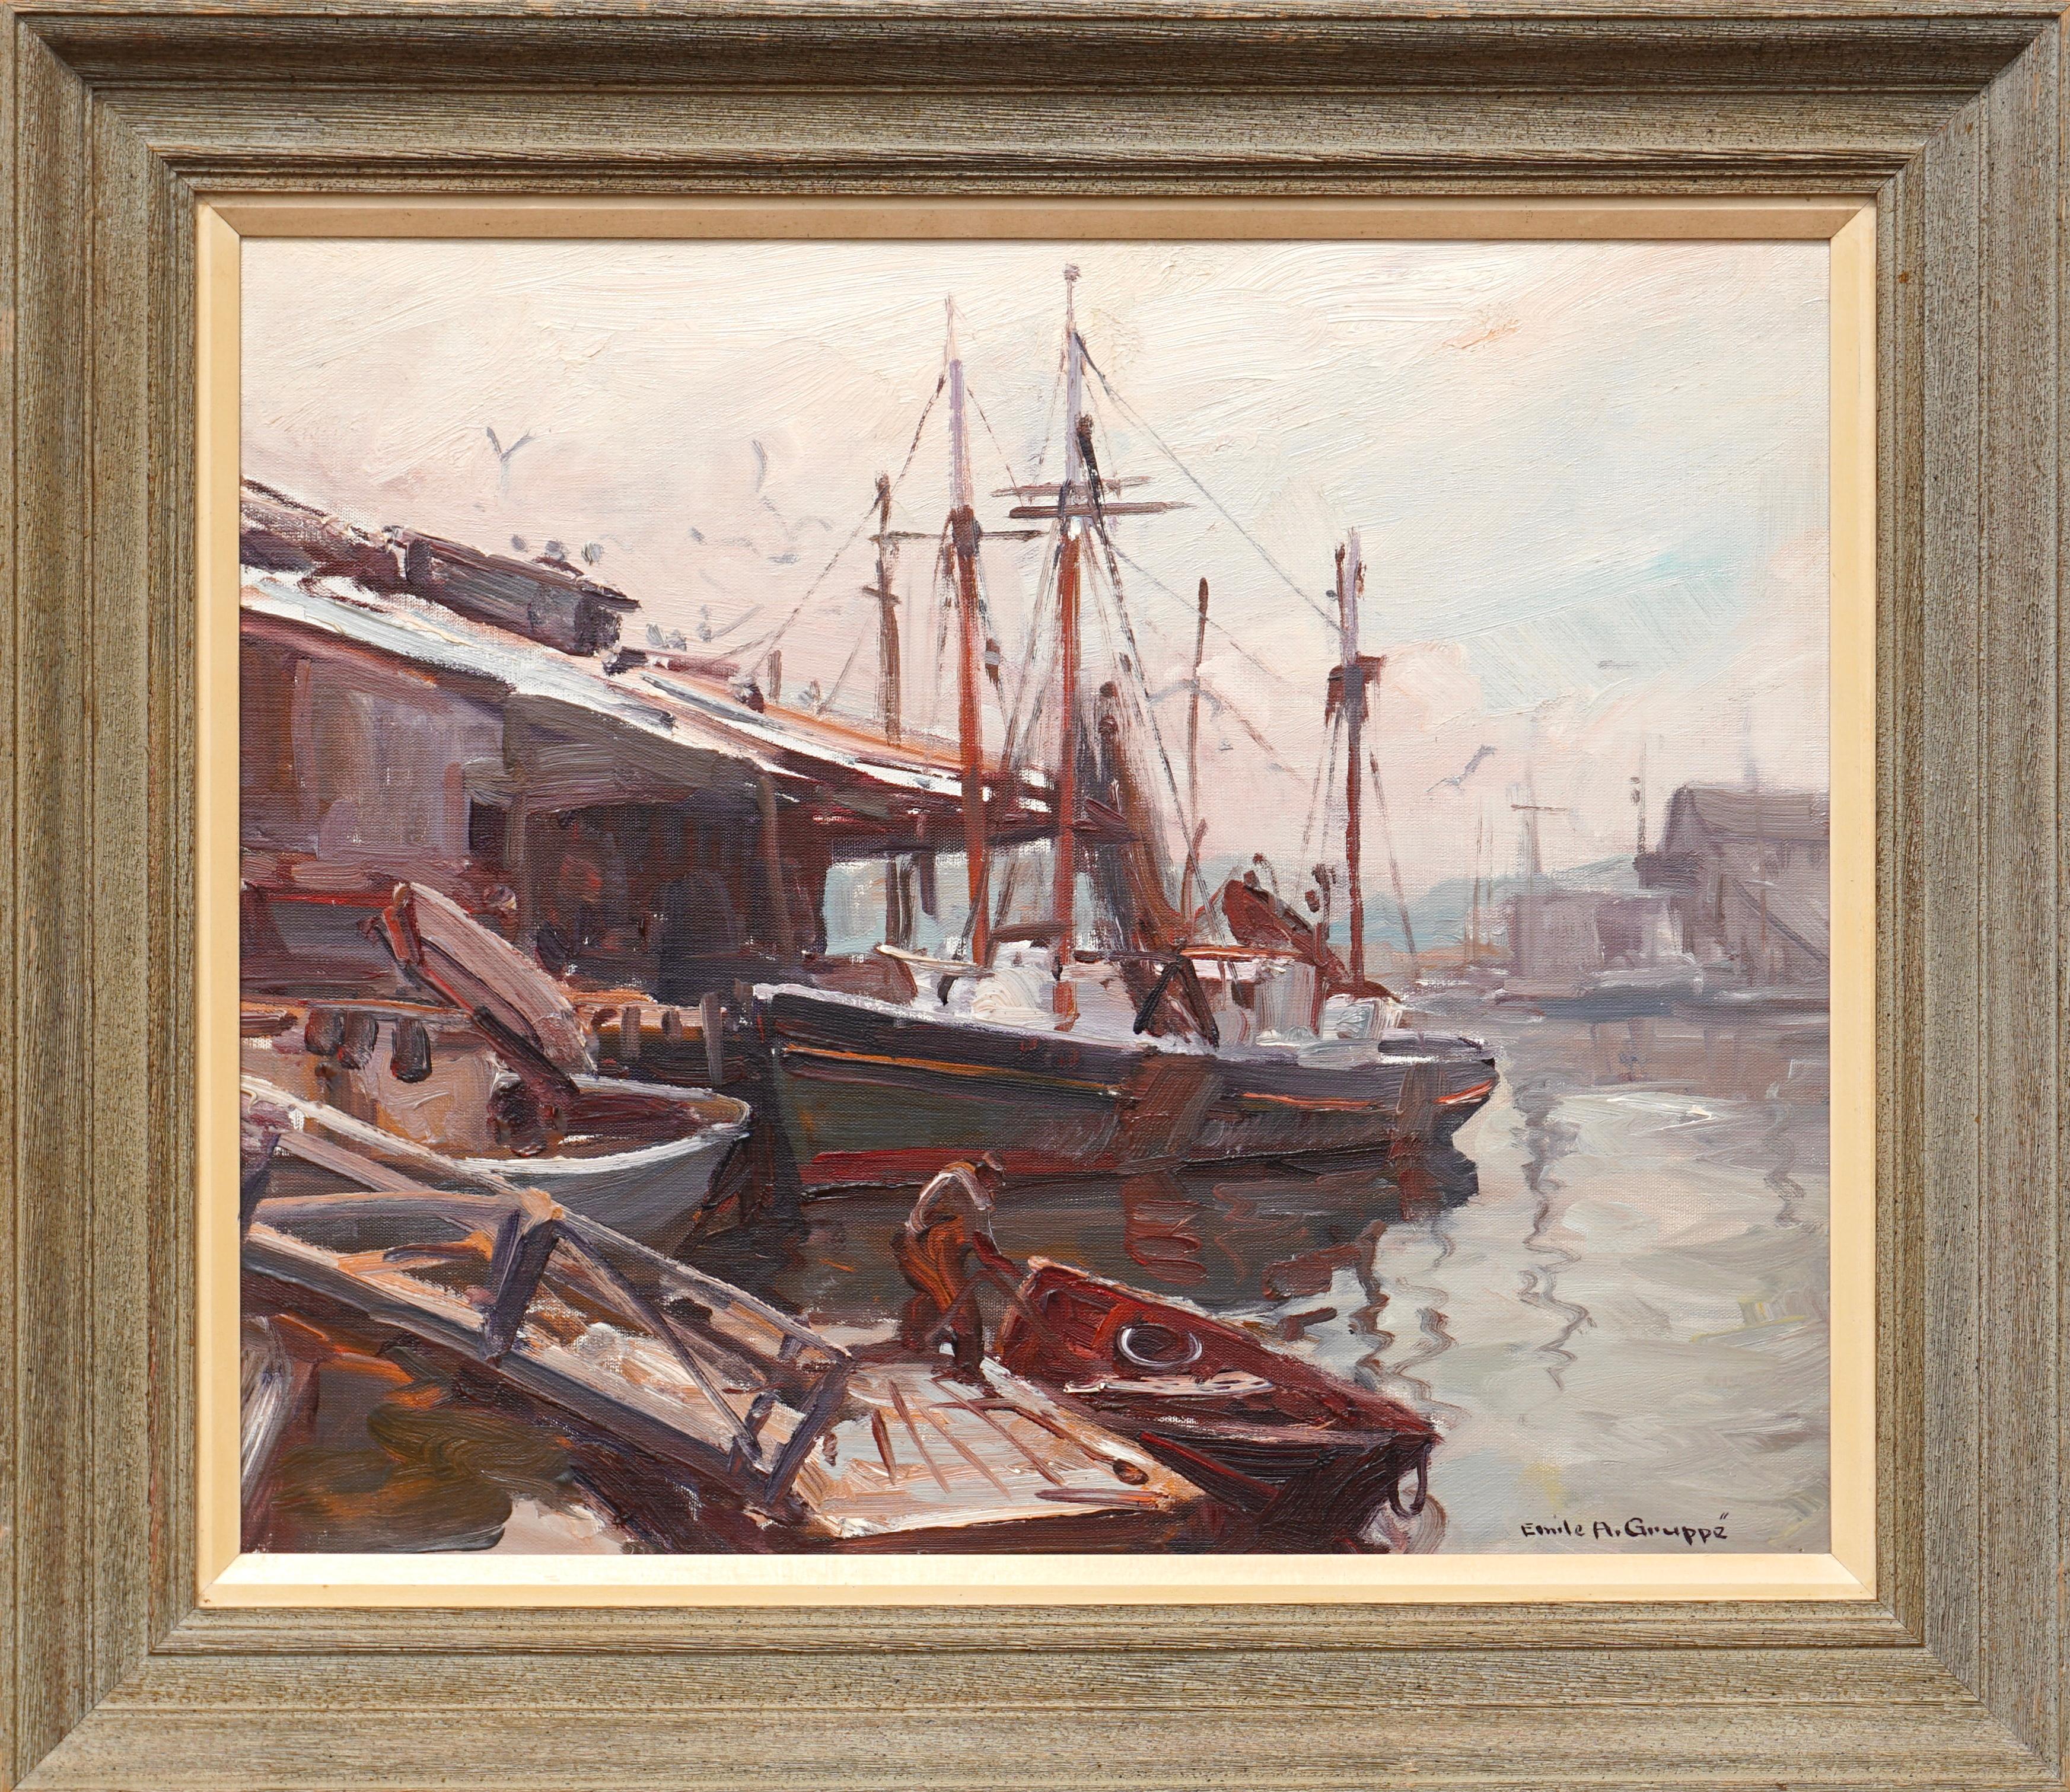 Emile Albert Gruppe (American, 1896-1978) Gloucester Docks, circa 1950
Oil on canvas 20 x 24 inches (50.8 x 61.0 cm) 
Original Frame: 26 X 30 Inches
Signed lower right: Emile A. Gruppe Signed and titled on the stretcher: Gloucester Docks by Emile A.